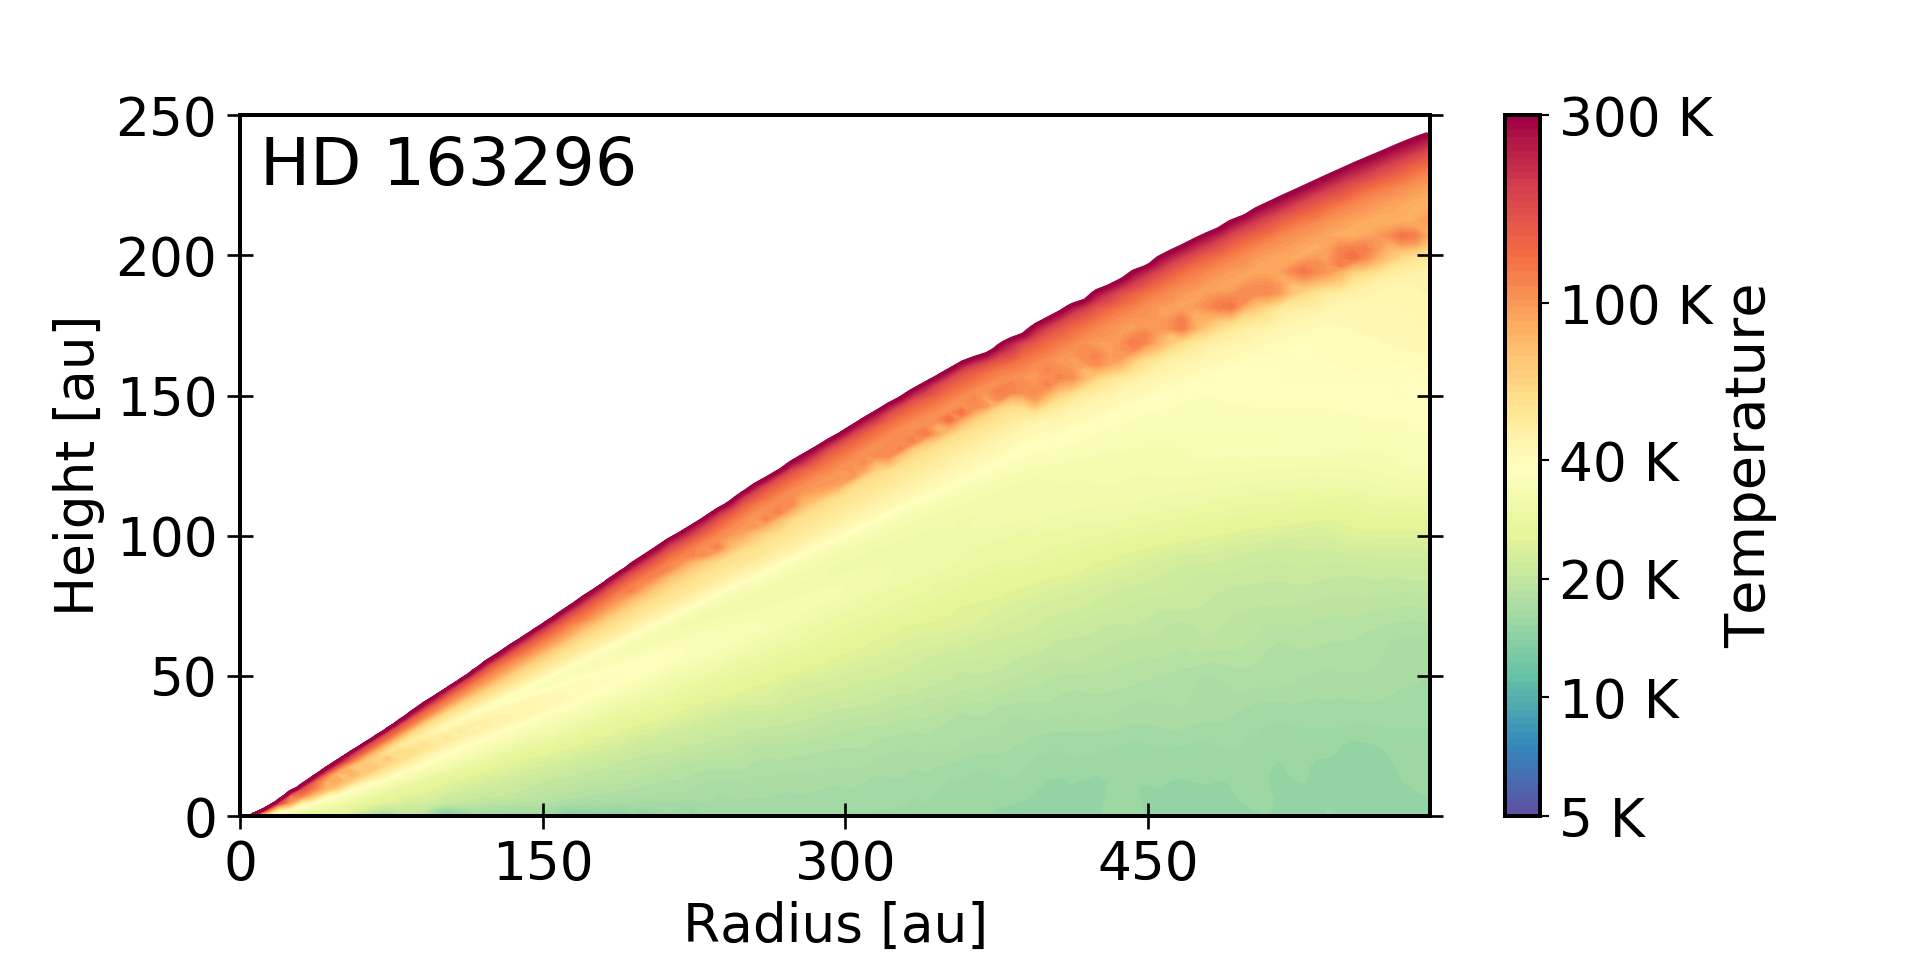 The two dimensional, radial and vertical, gas temperature structure of the disk around HD 163296. In the radial direction the plot extends from 0 to 600 au, and in the vertical direction it extends up to 250 au. The temperature range is between 5 and 300 kelvin. The vast majority of the disk, starting from the midplane is less than 40 kelvin. There is a steep increase from around 80 kelvin to 300 kelvin from just below the atmosphere up to the highest gaseous layers. 